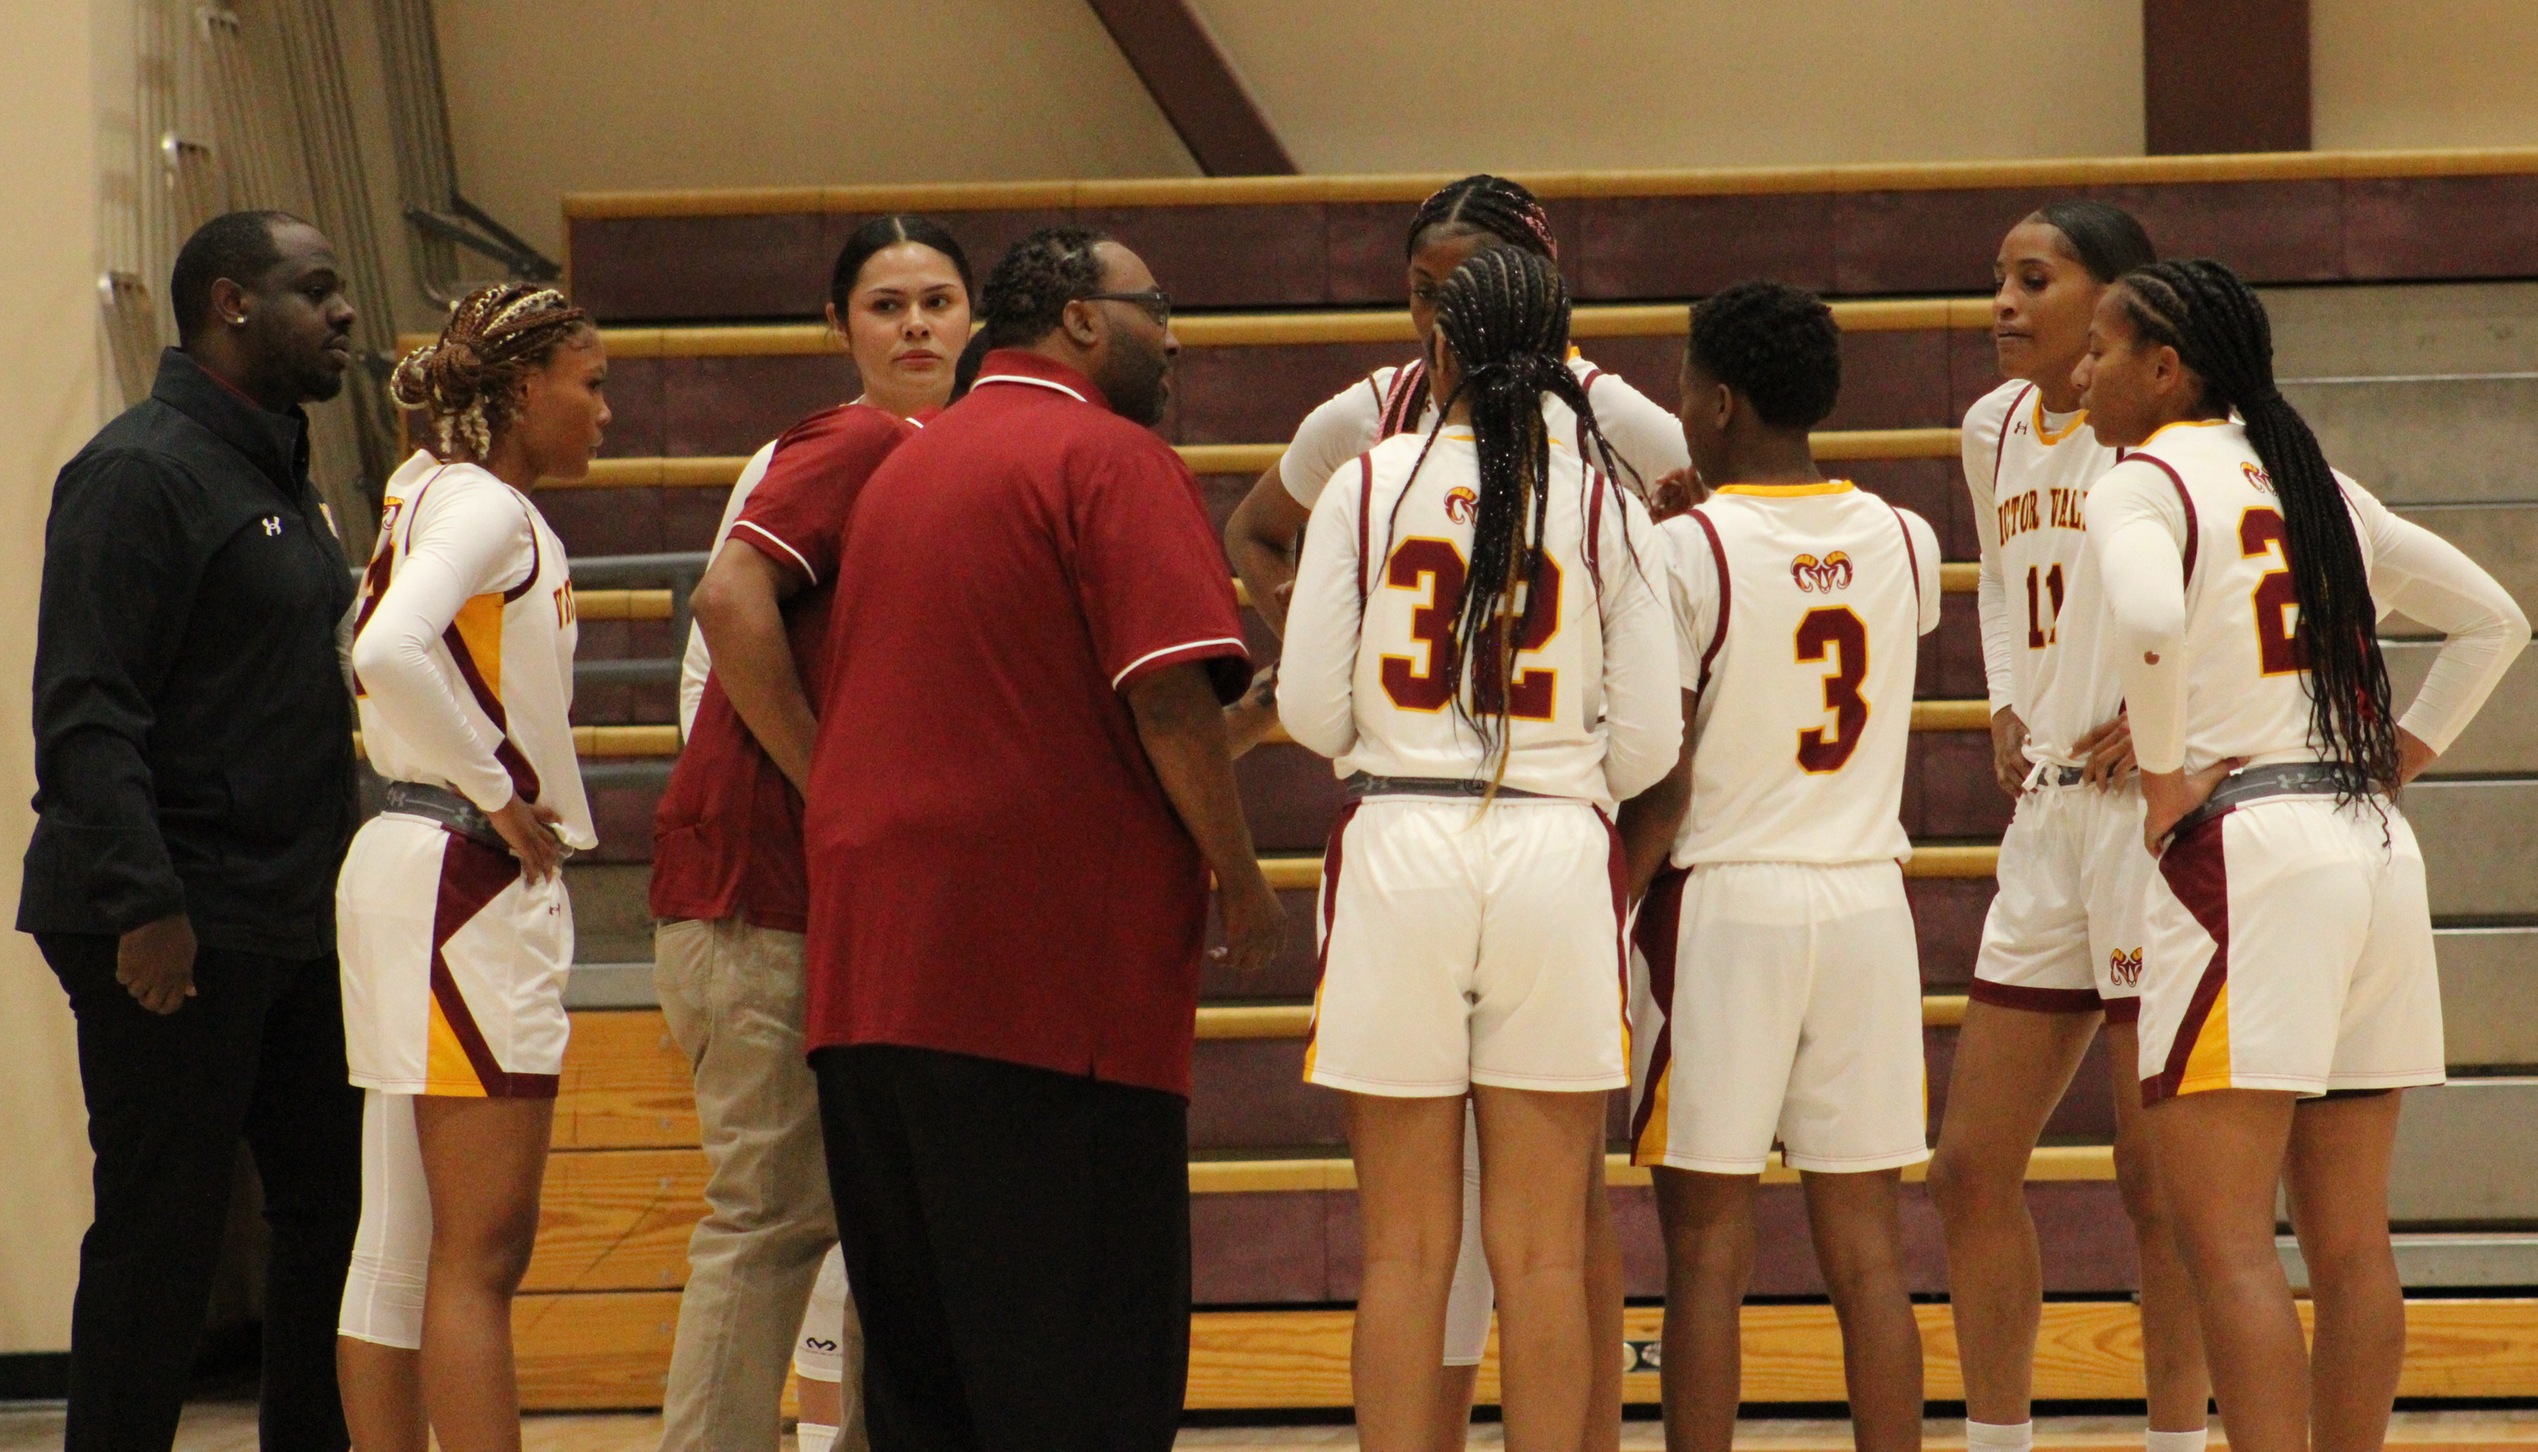 After a close loss to Long Beach, the Lady Rams dominate against LA Trade-Tech